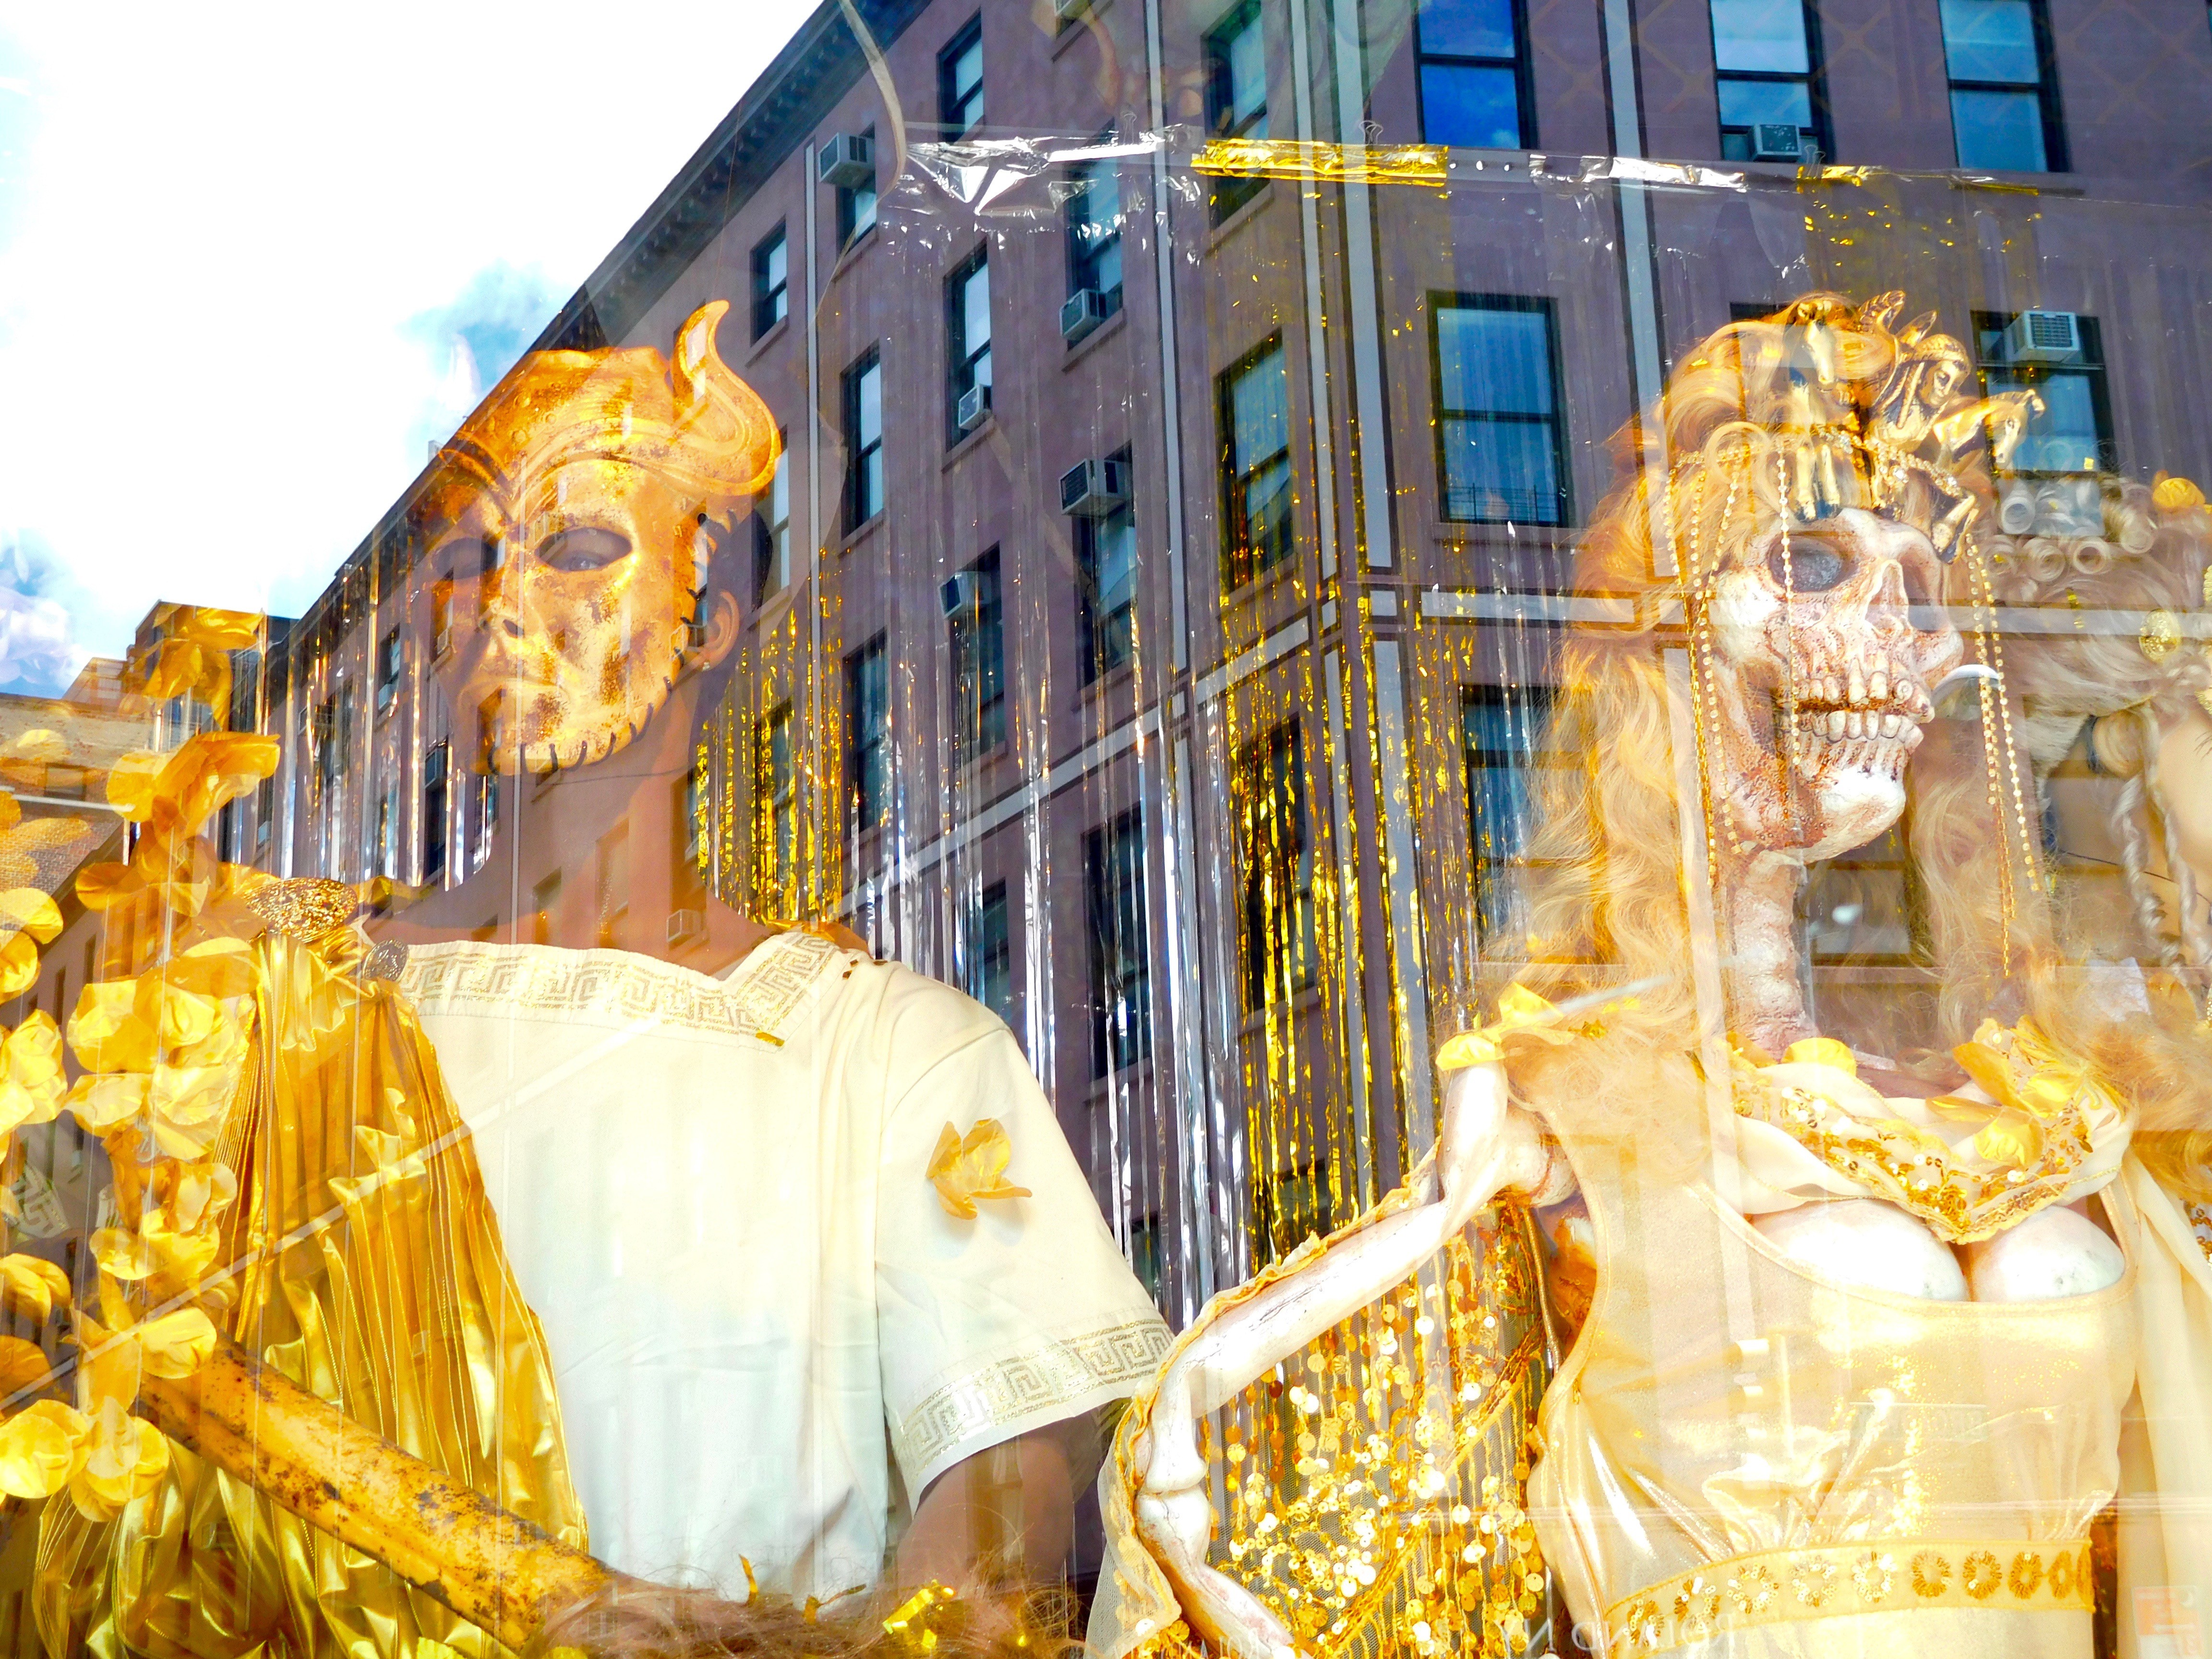 Two golden figures, one a skeleton, are displayed in a window that shows a reflection of the building behind it.